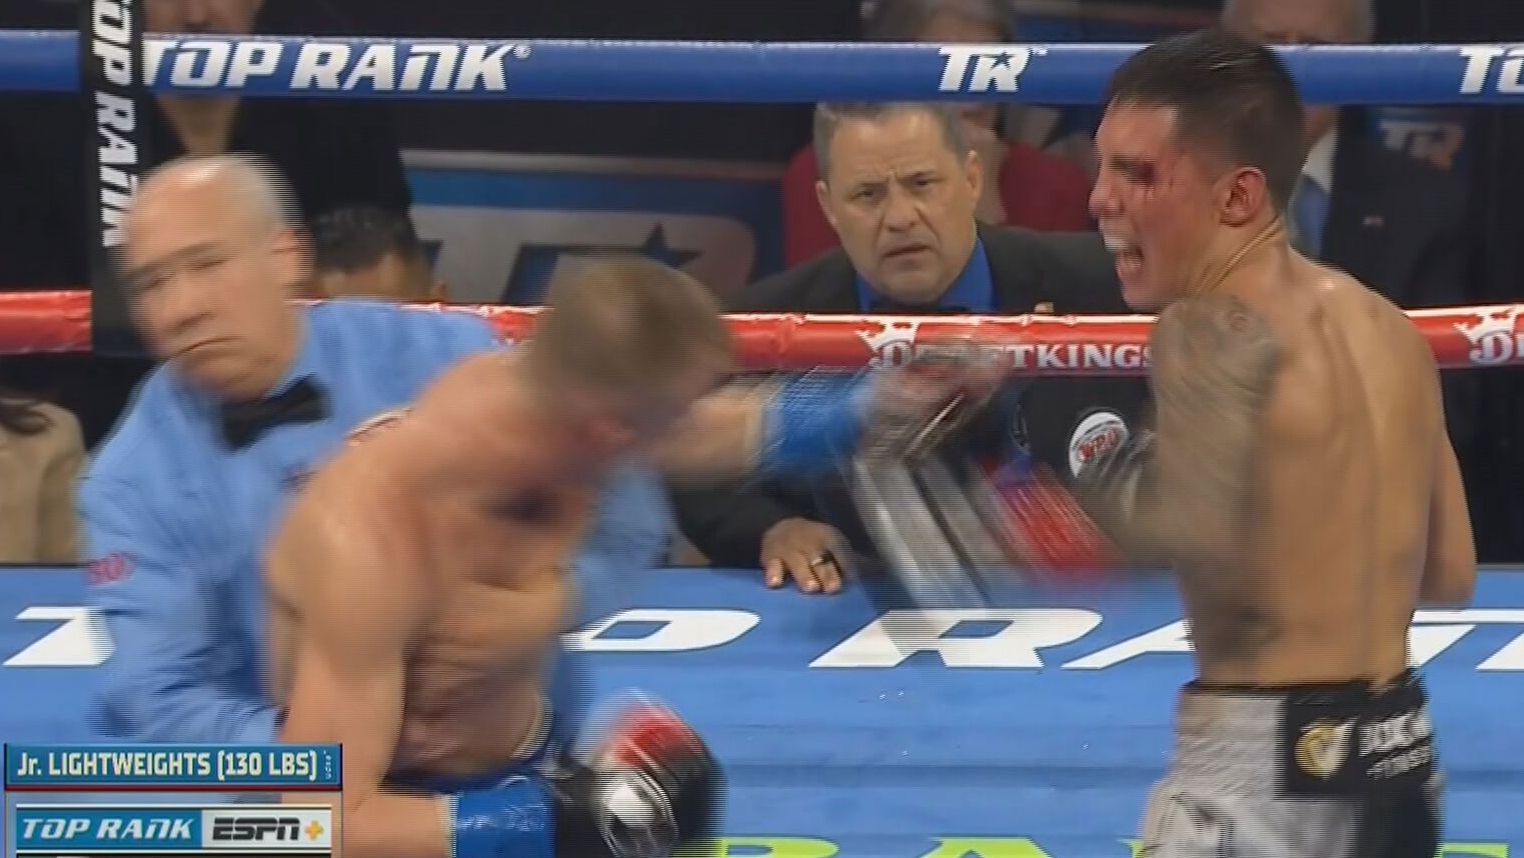 The referee stepped in to stop the fight between Liam Wilson and Oscar Valdez.